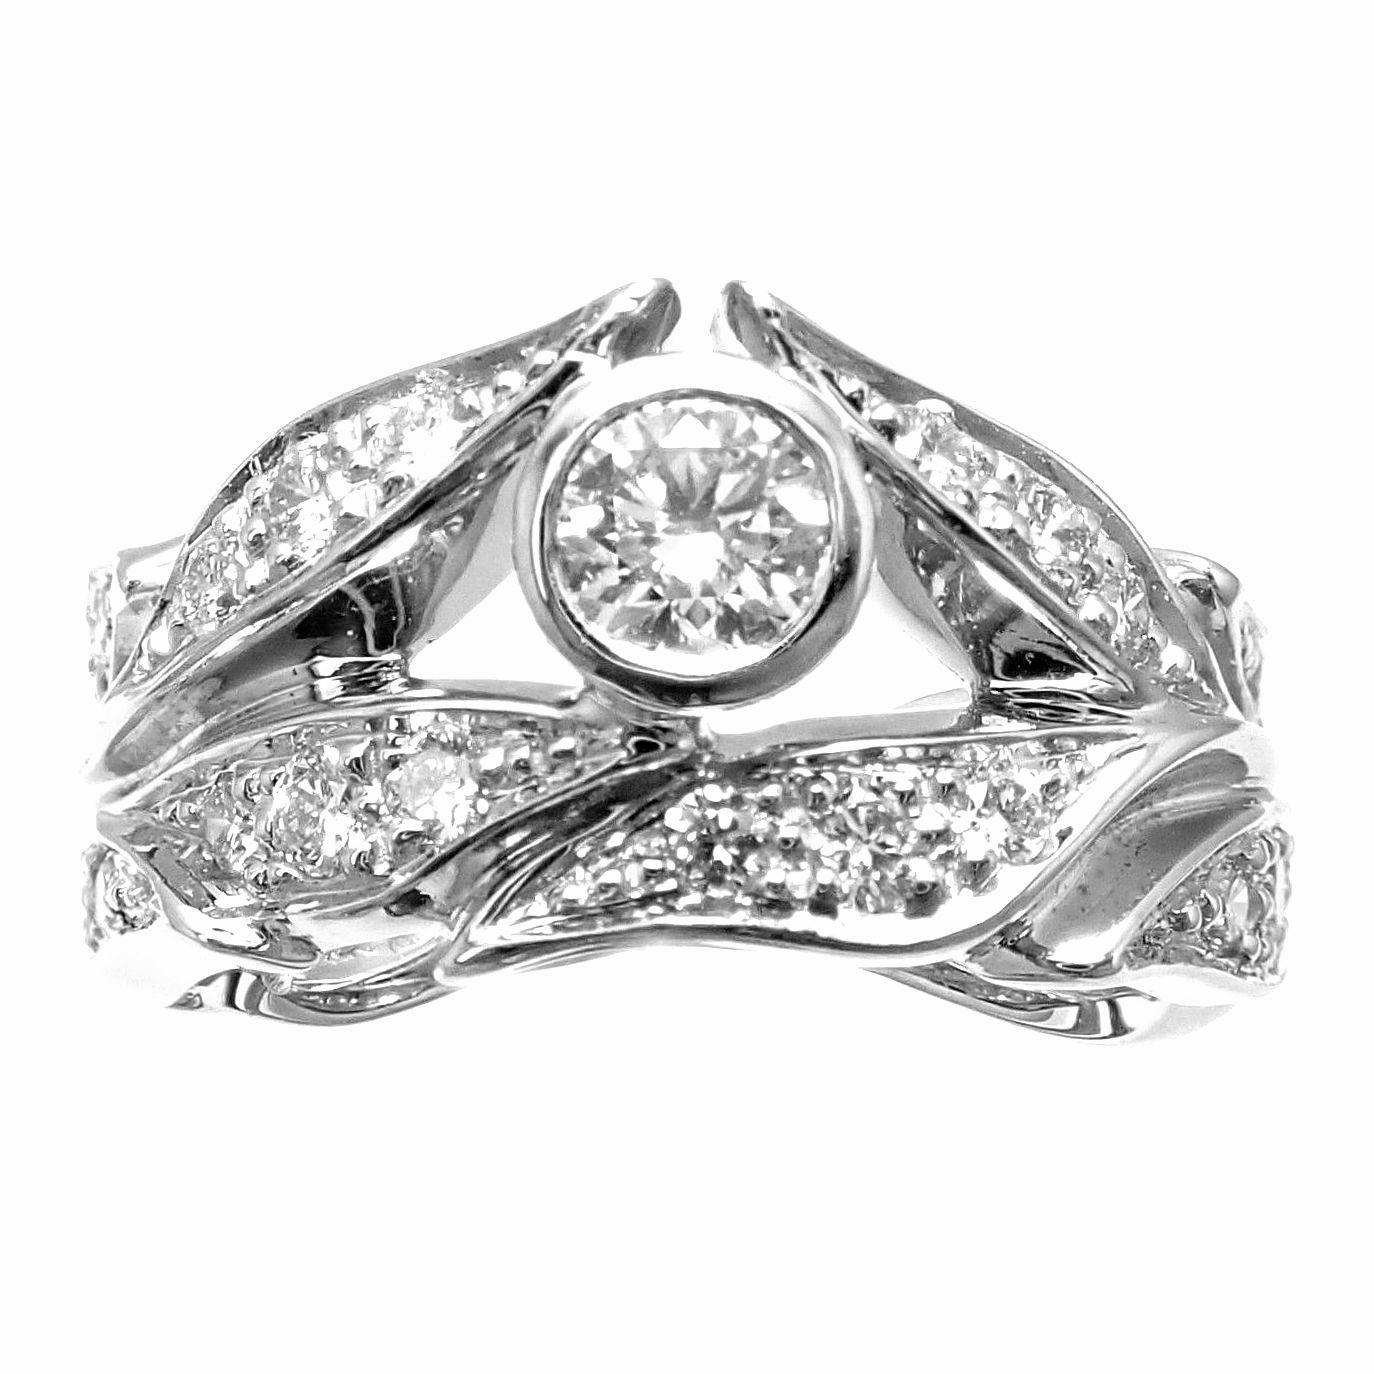 18k White Gold Mi Princes Greco Roman Diamond Crown Band Ring by Carrera Y Carrera. 
With 1.09ctw Diamonds
36x Smaller Diamonds
1x Larger Diamond
This ring comes with Box Certificate and Tag. 
Retail Price: $10,500 plus tax.
Details: 
Ring Size: